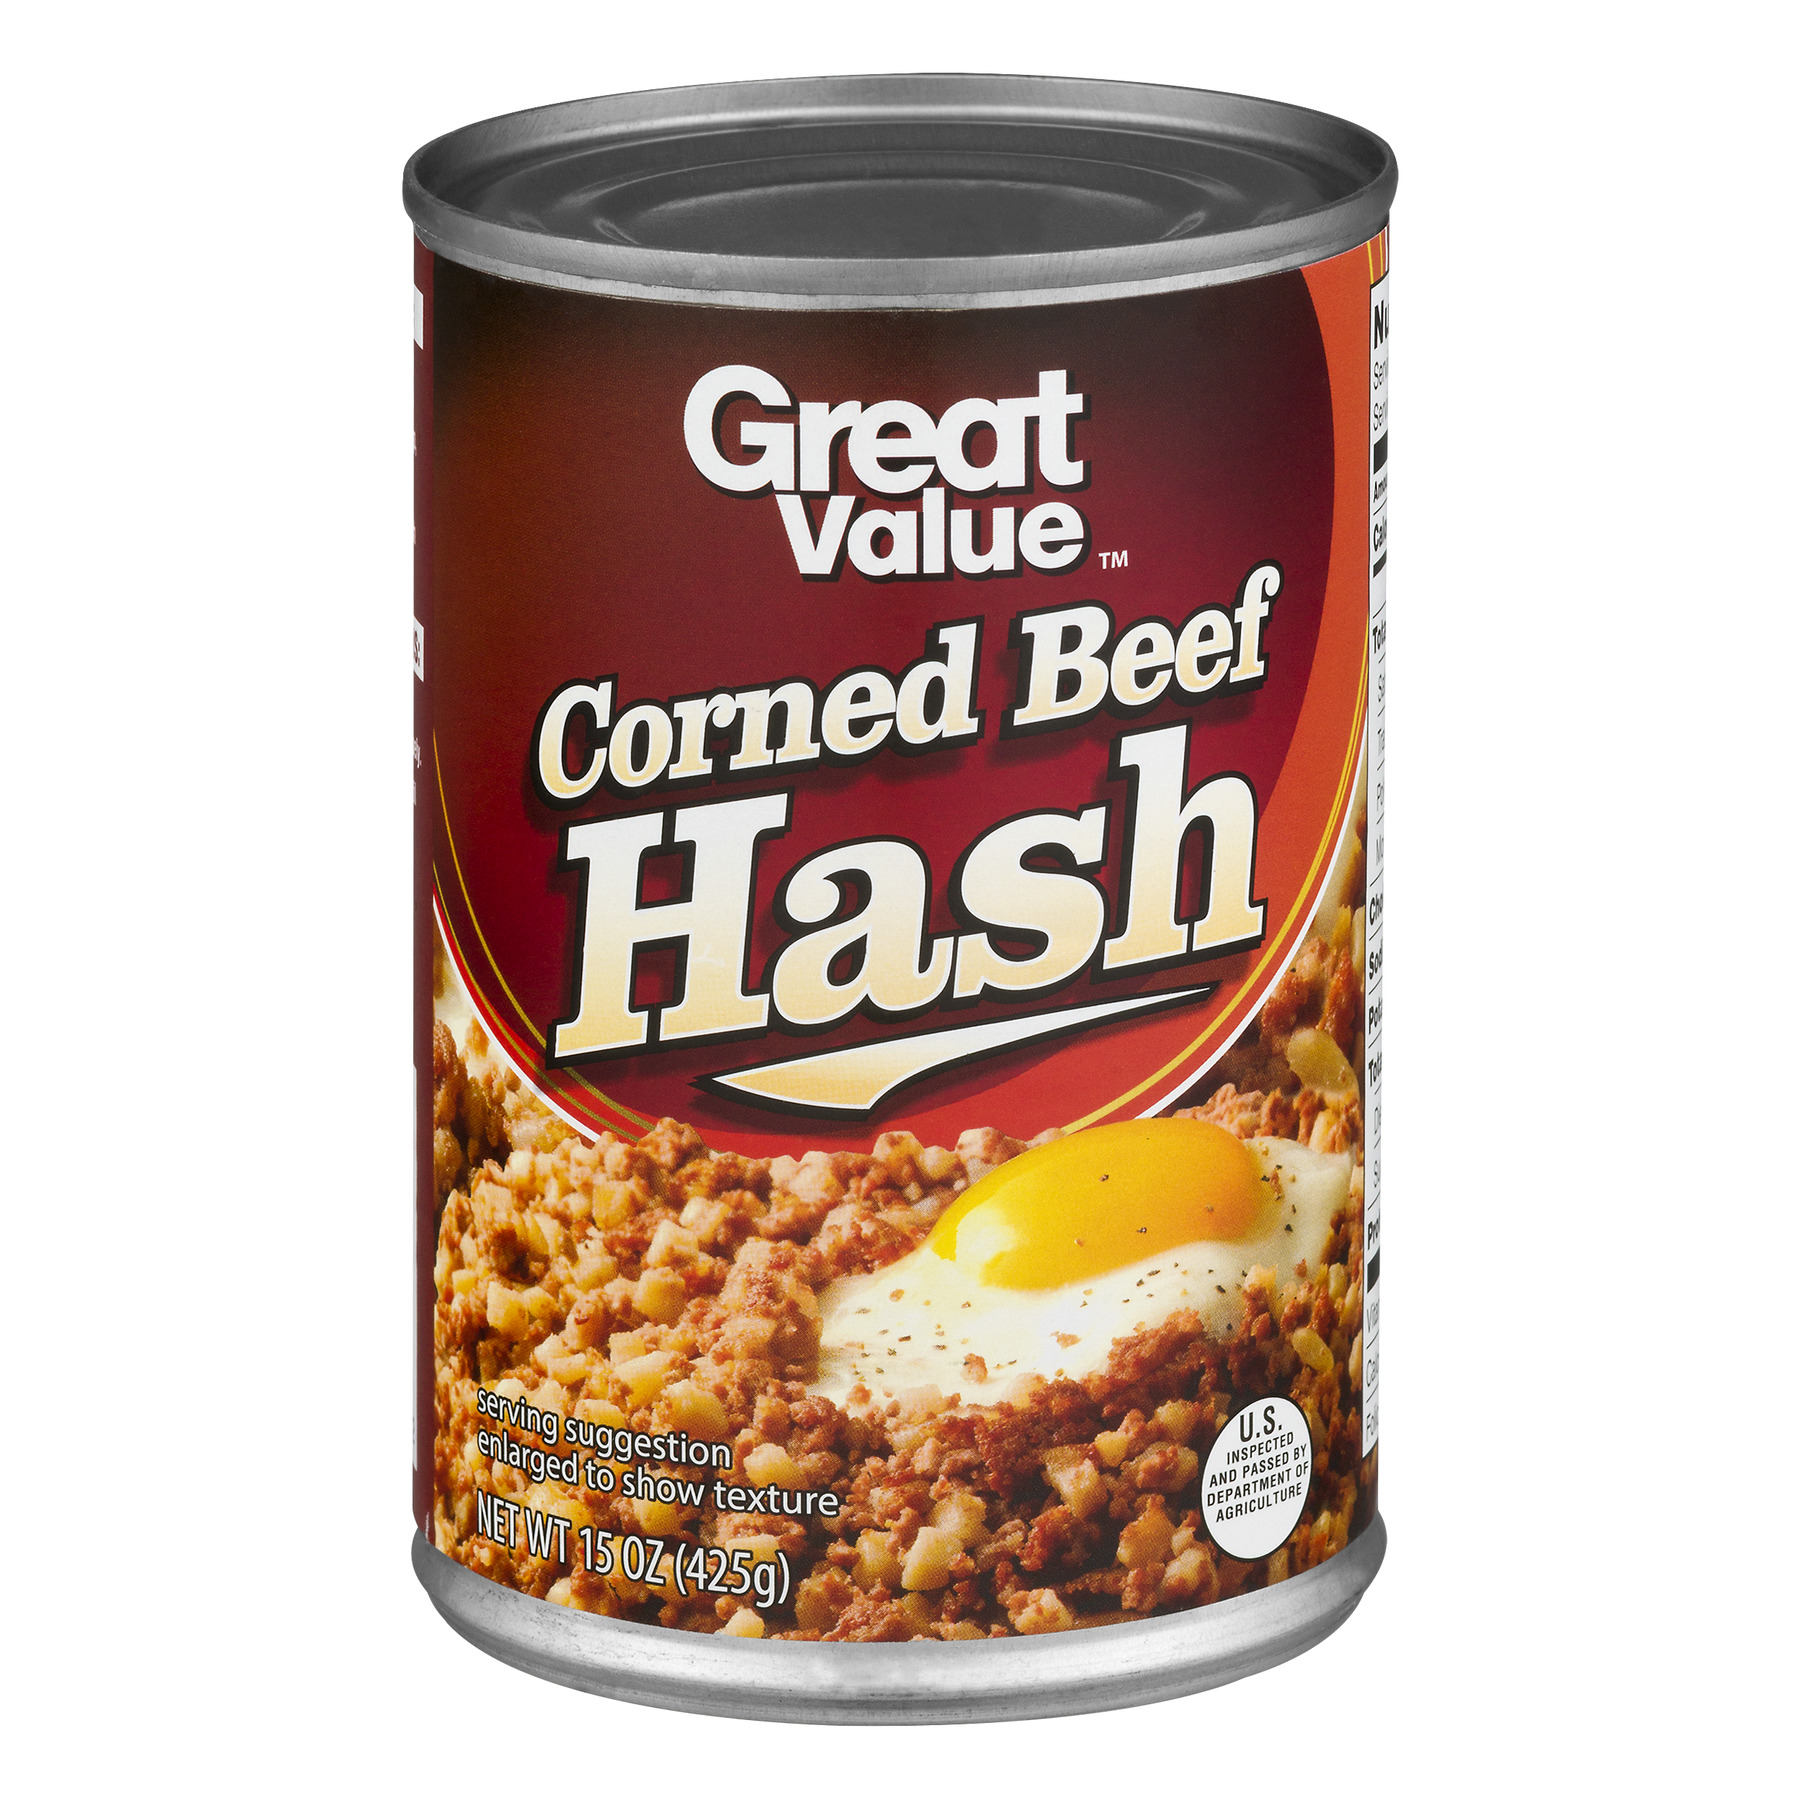 Great Value Corned Beef Hash, 15 oz Can - image 1 of 9